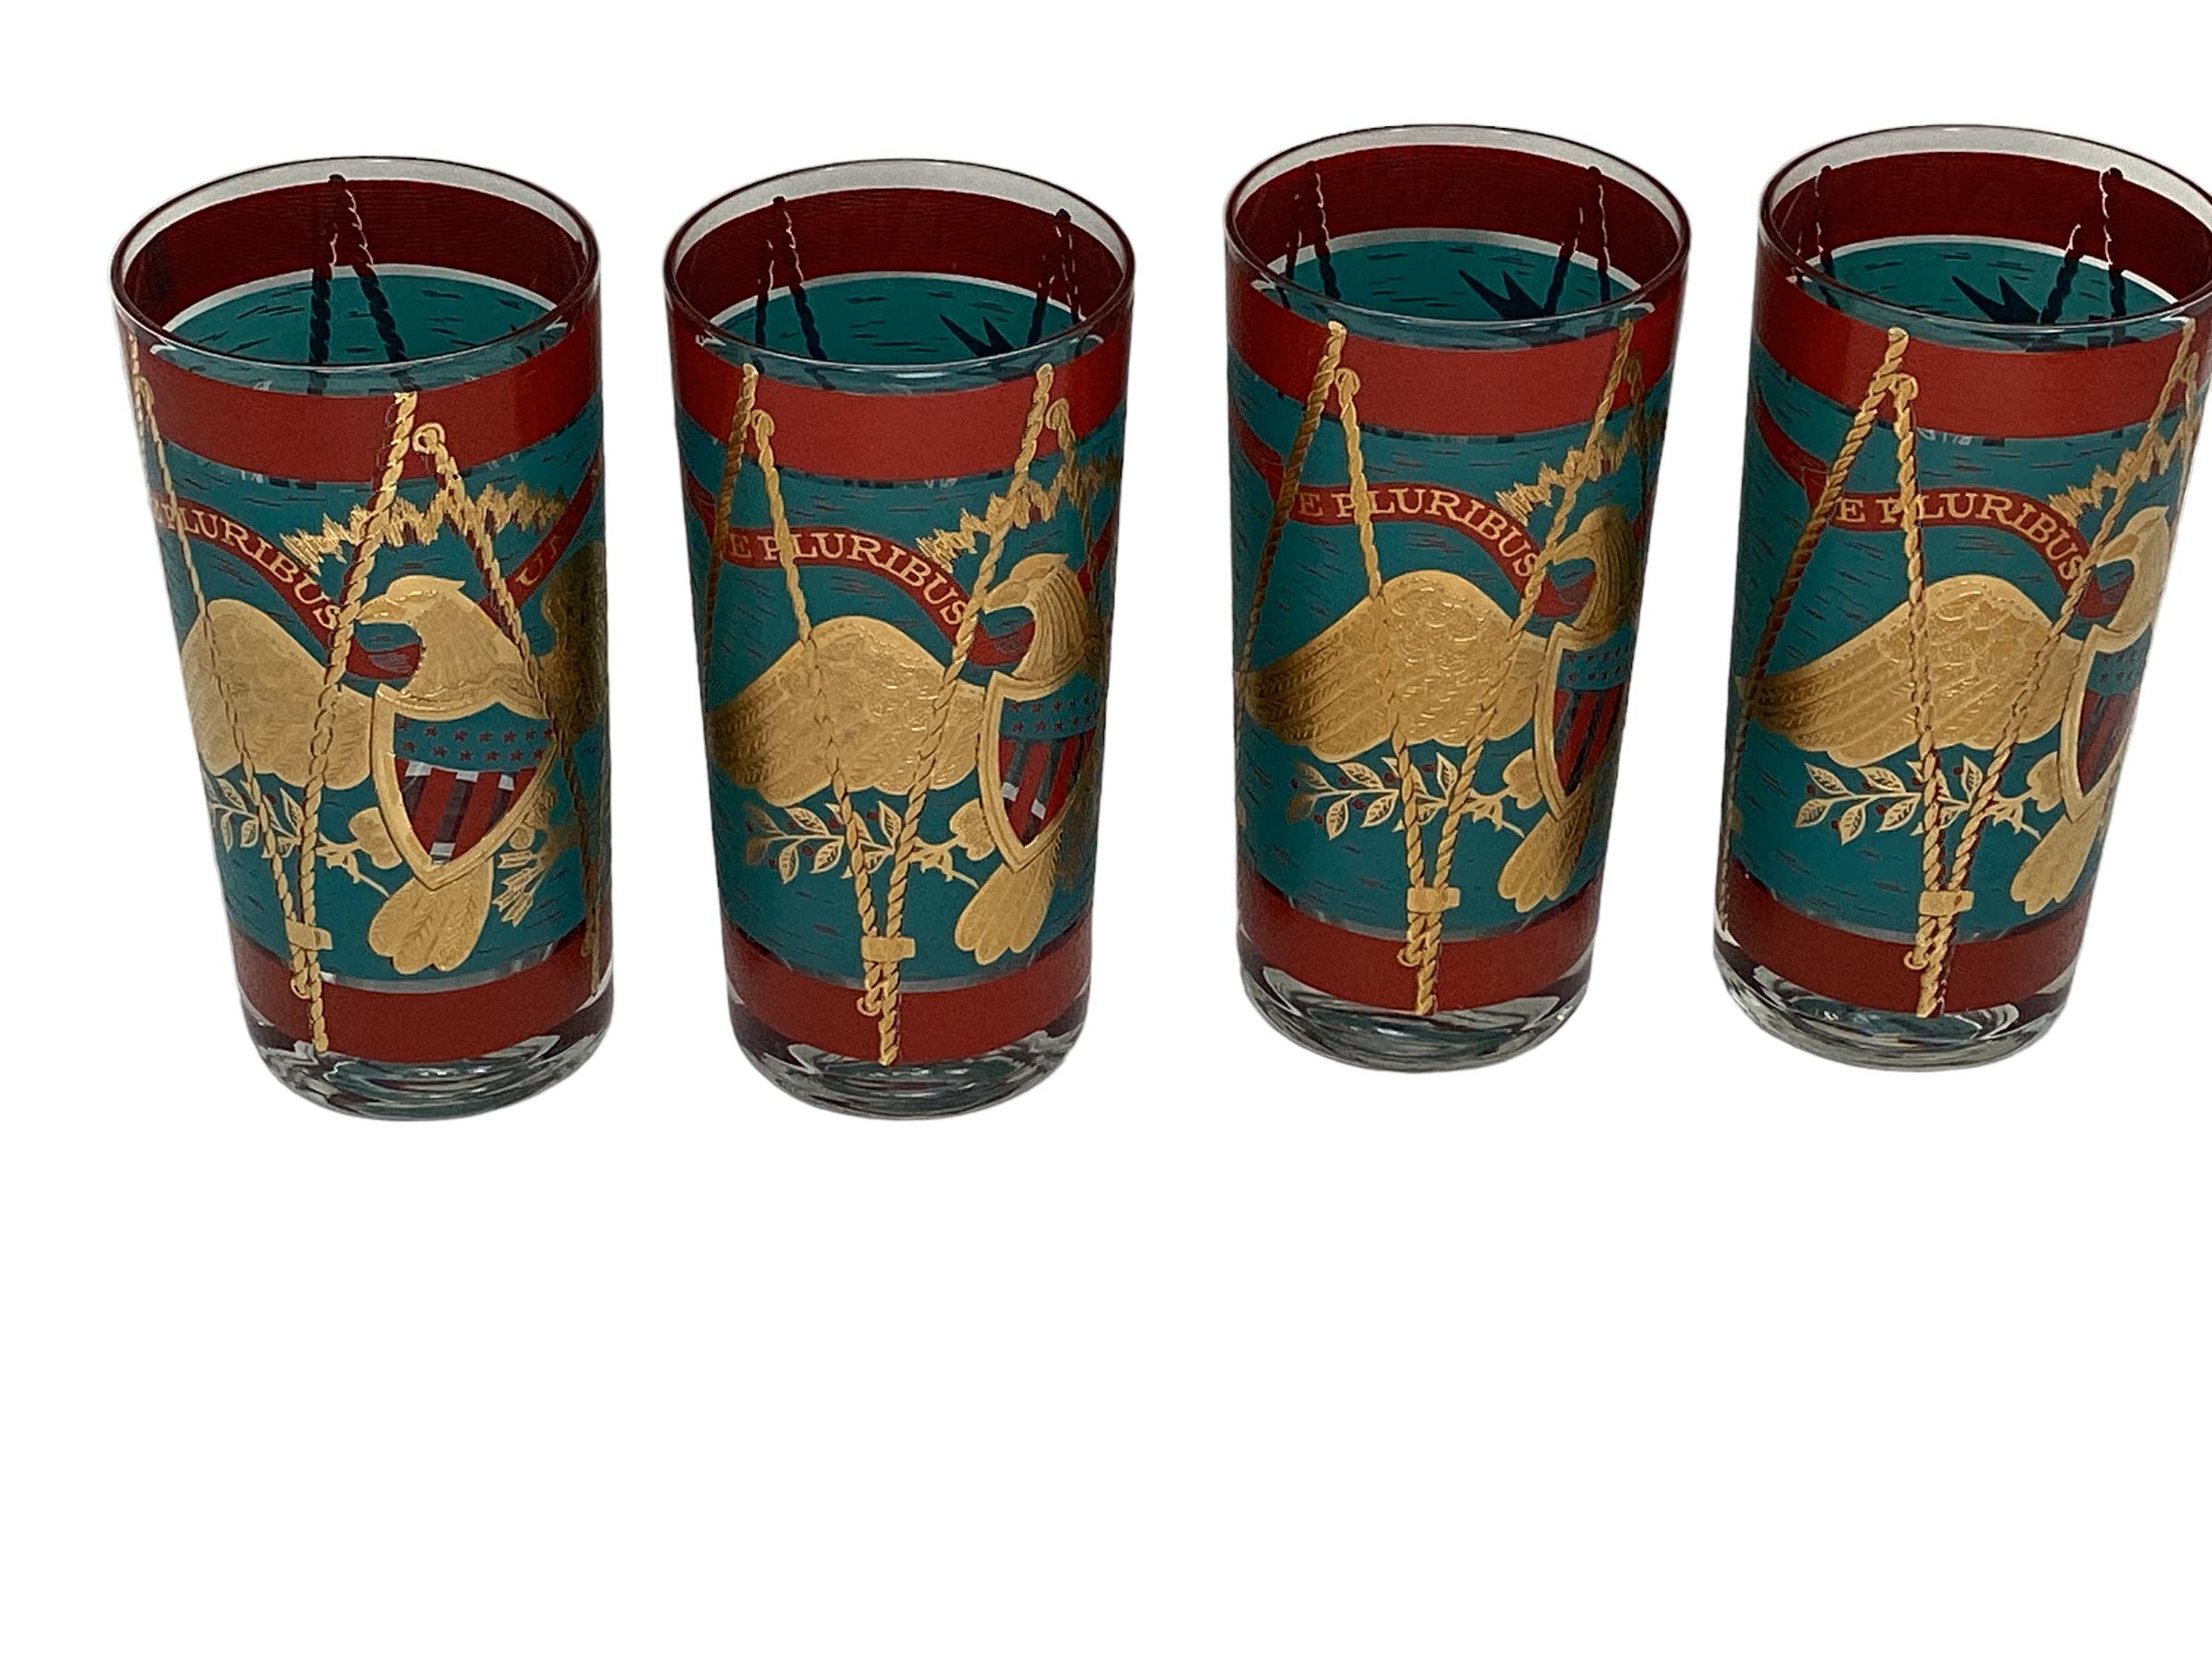 Set of 8 Vintage Cera Glassware Highball Glasses in the Regimental Drum pattern. Mid-Century Modern highball glasses decorated as parade drums in teal and red enamel with 22 karat gold. The front with a large patriotic eagle below a banner with the